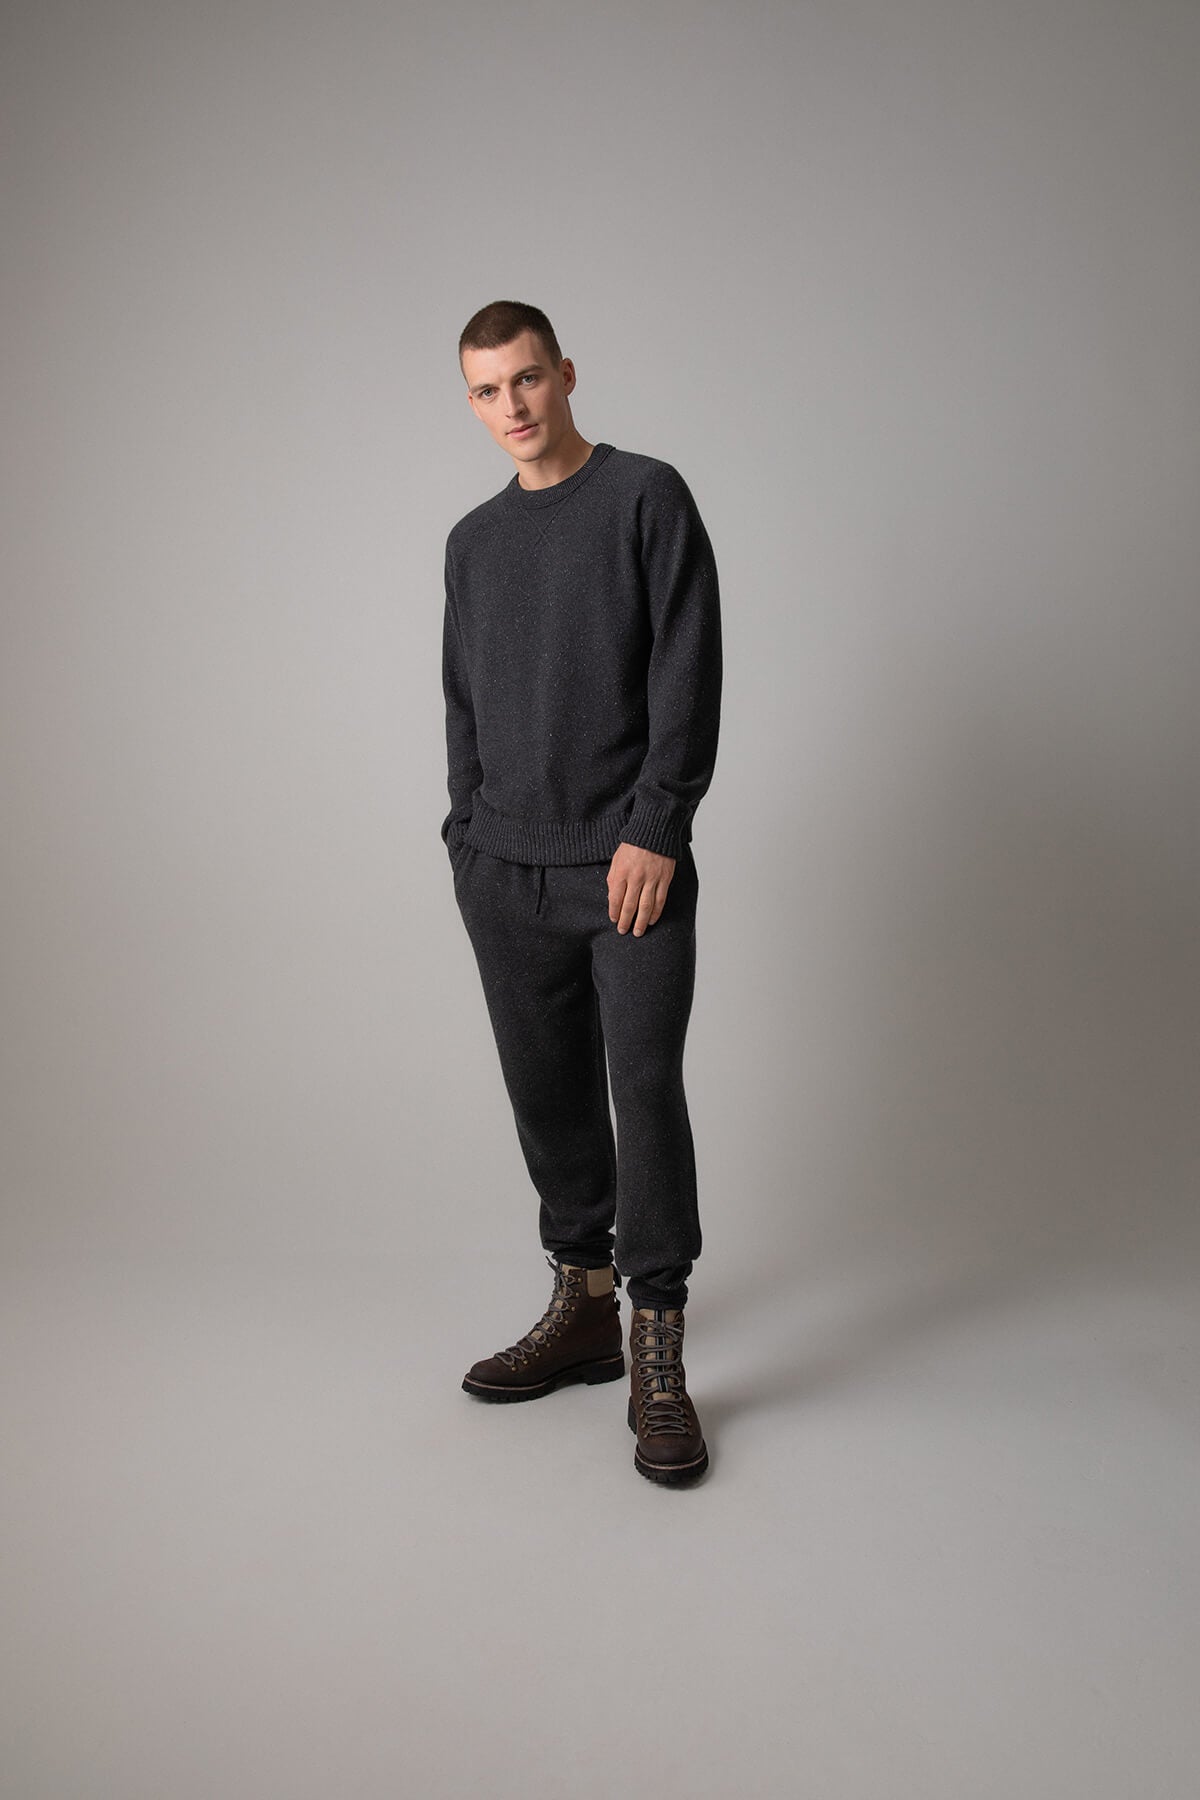 Johnstons of Elgin’s Men's Cashmere Donegal Sweatshirt in Charcoal grey on model wearing matching grey joggers on a grey background KAA05147004521